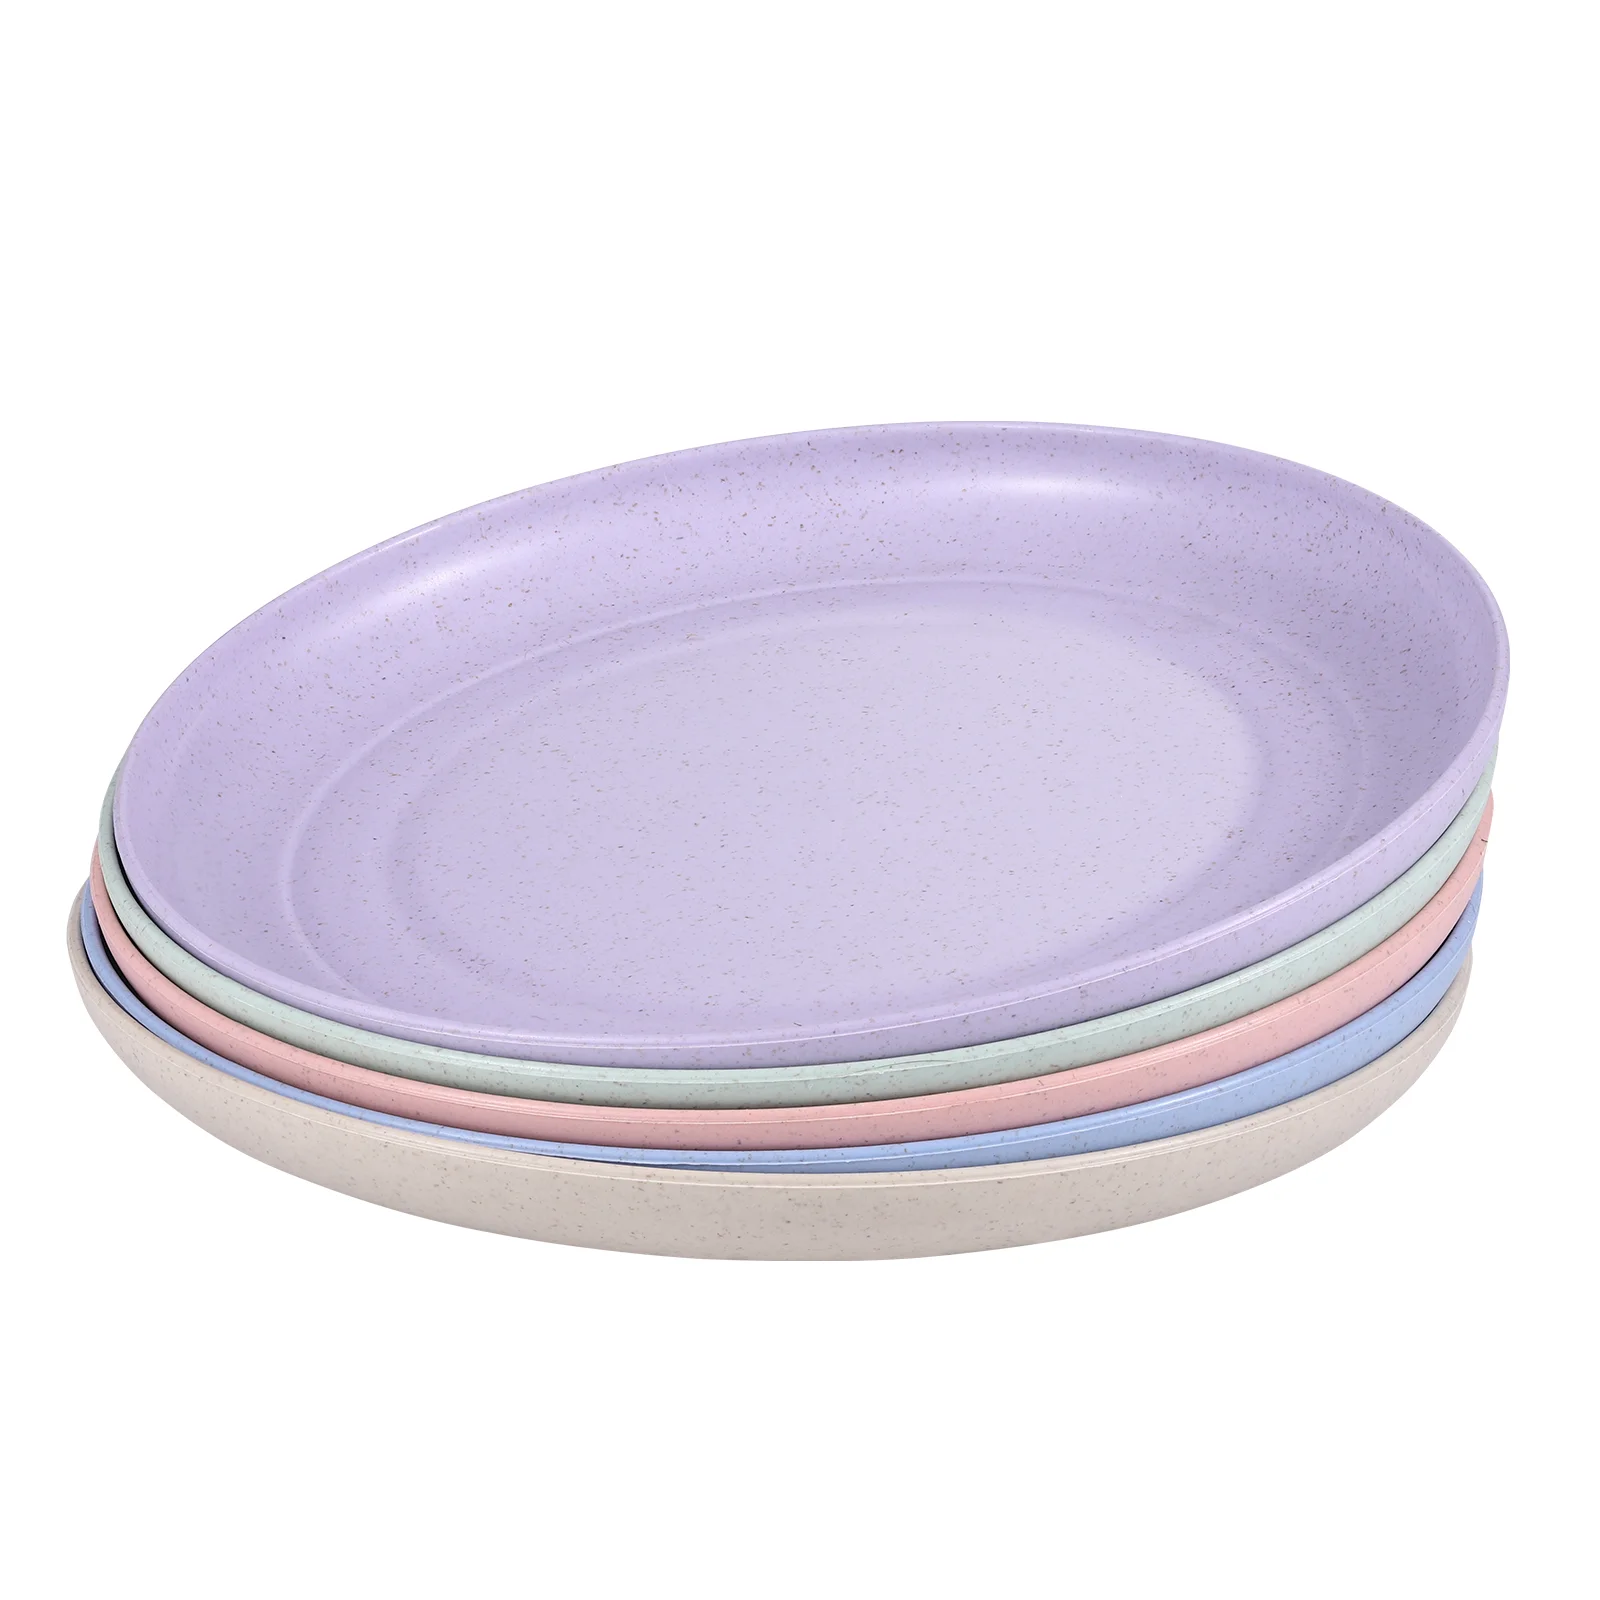 

Kids Cutlery Dinner Table Salad Plates Camping Plate Dish Plates Microwave Dishes Child Degradable Dishes Plates